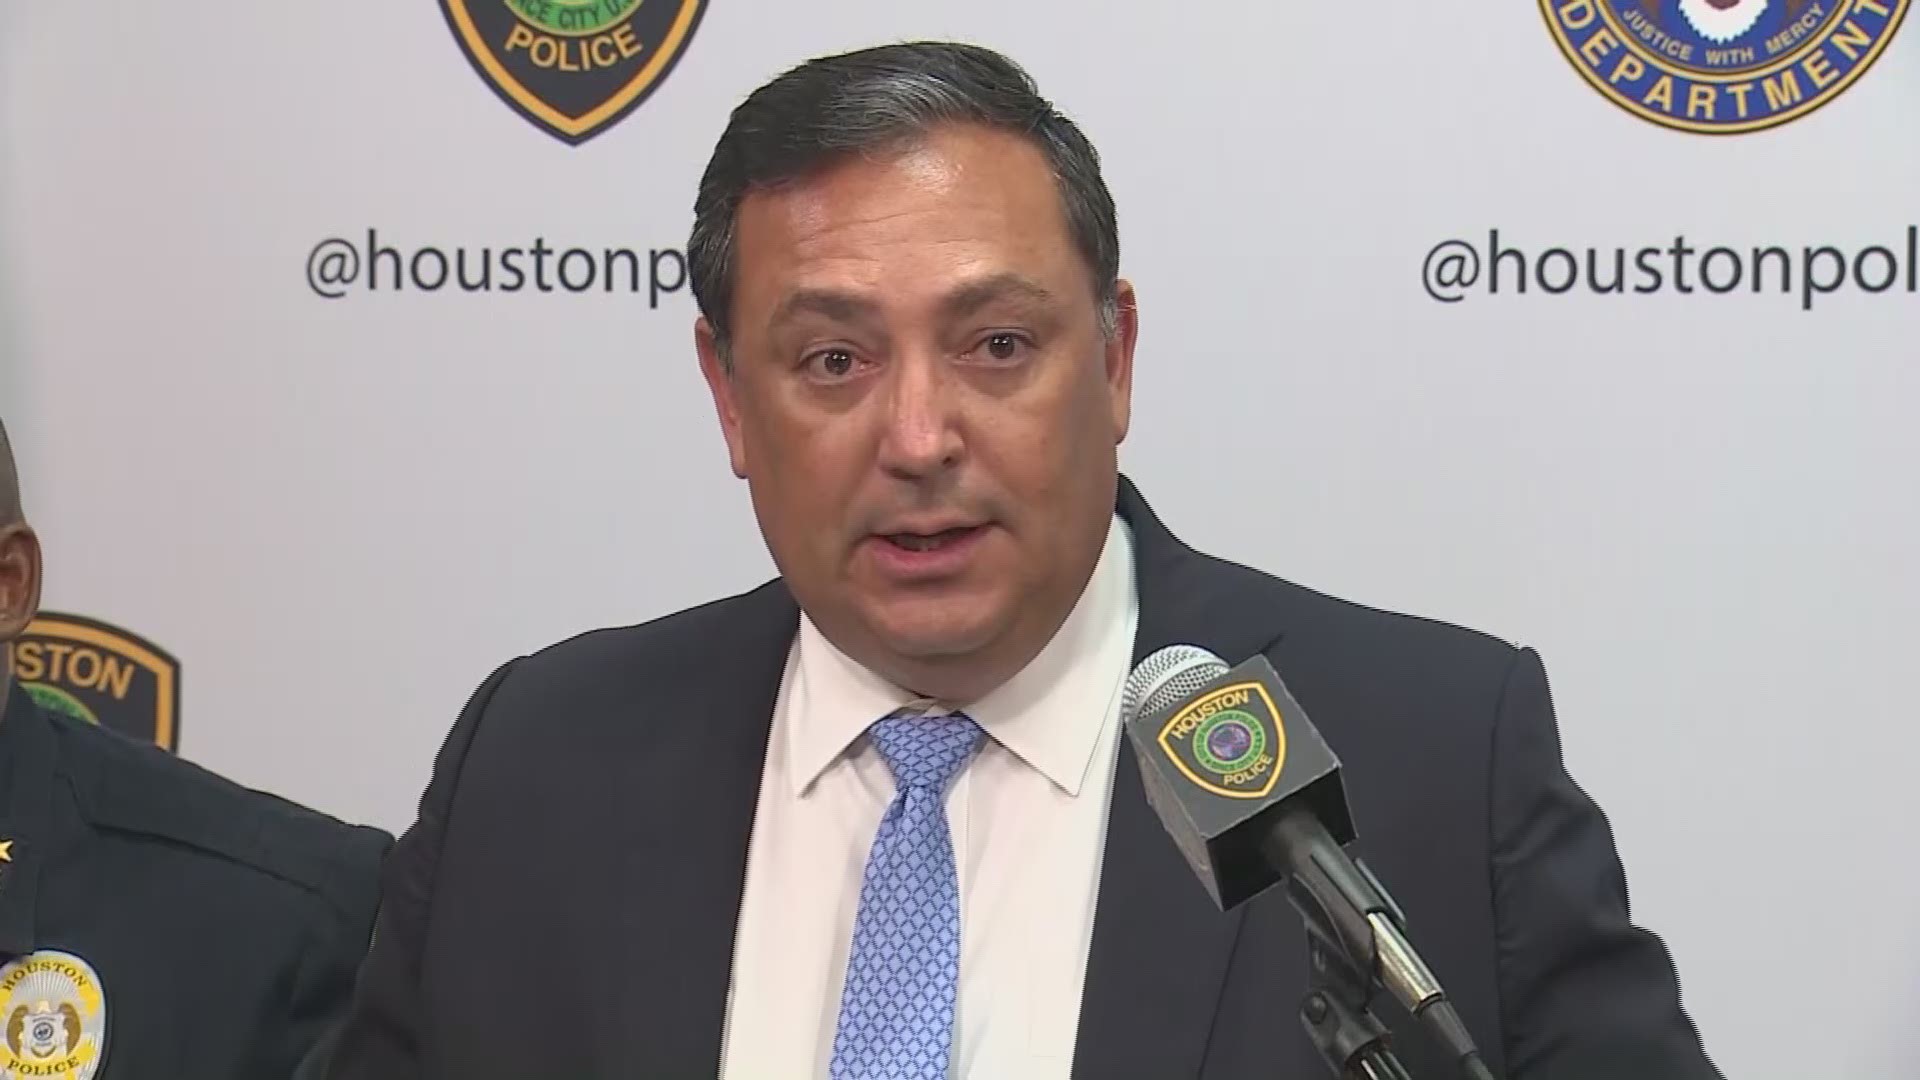 Houston Police Chief Art Acevedo spoke about two former officers charged after the raid on Harding Street that killed two people. Gerald Goines has been charged with two counts of felony murder, and Steven Bryant is charged with second-degree tampering with a government document.